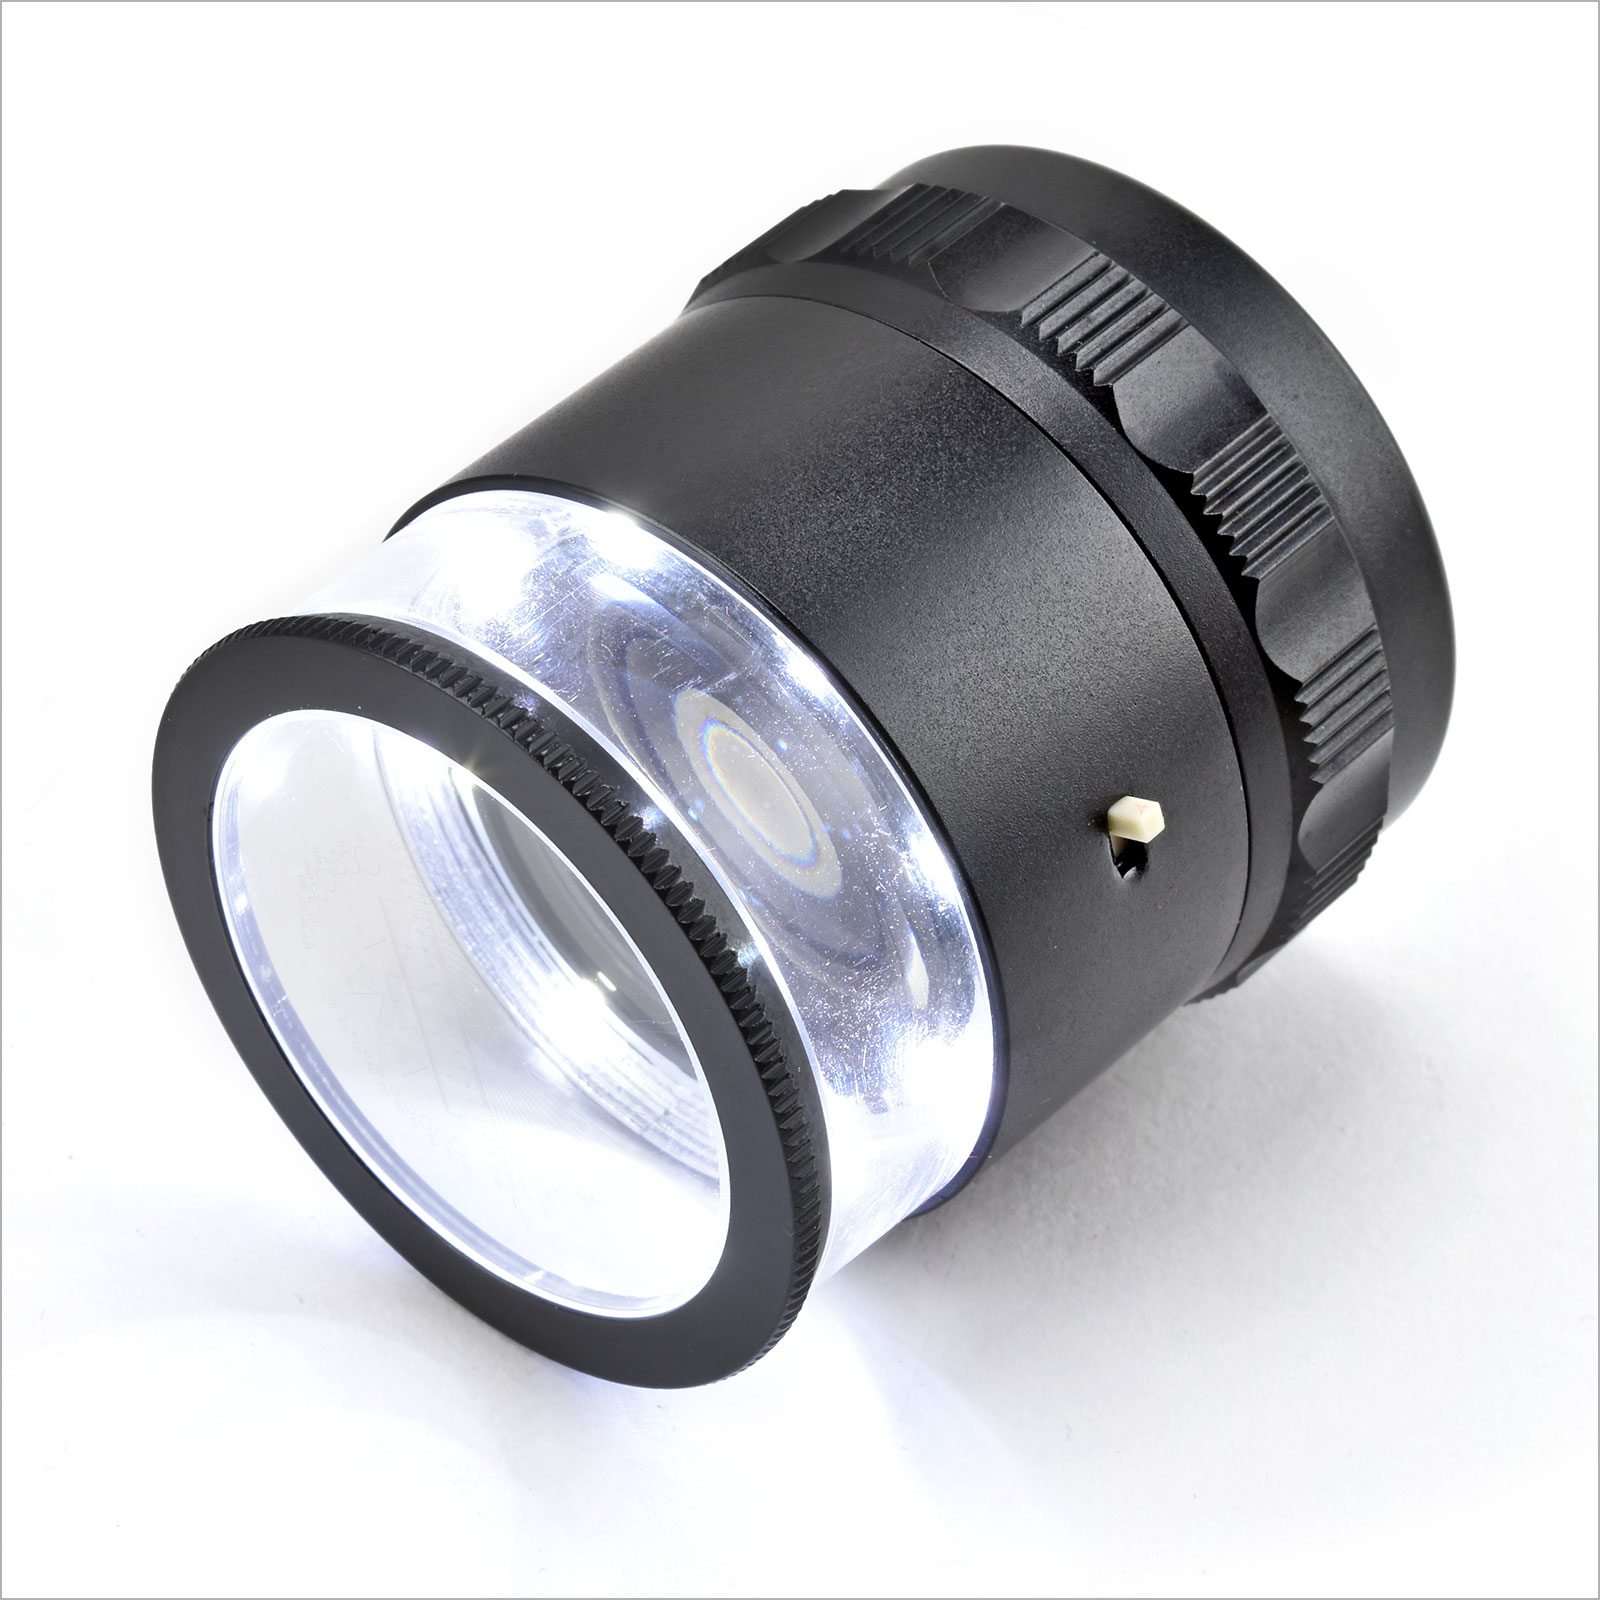 iGaging 36-LM40 Measuring Microscope 0.002/0.05 mm Magnifier Loupe with Scale Reticle LED Lighted Illuminated 40X 